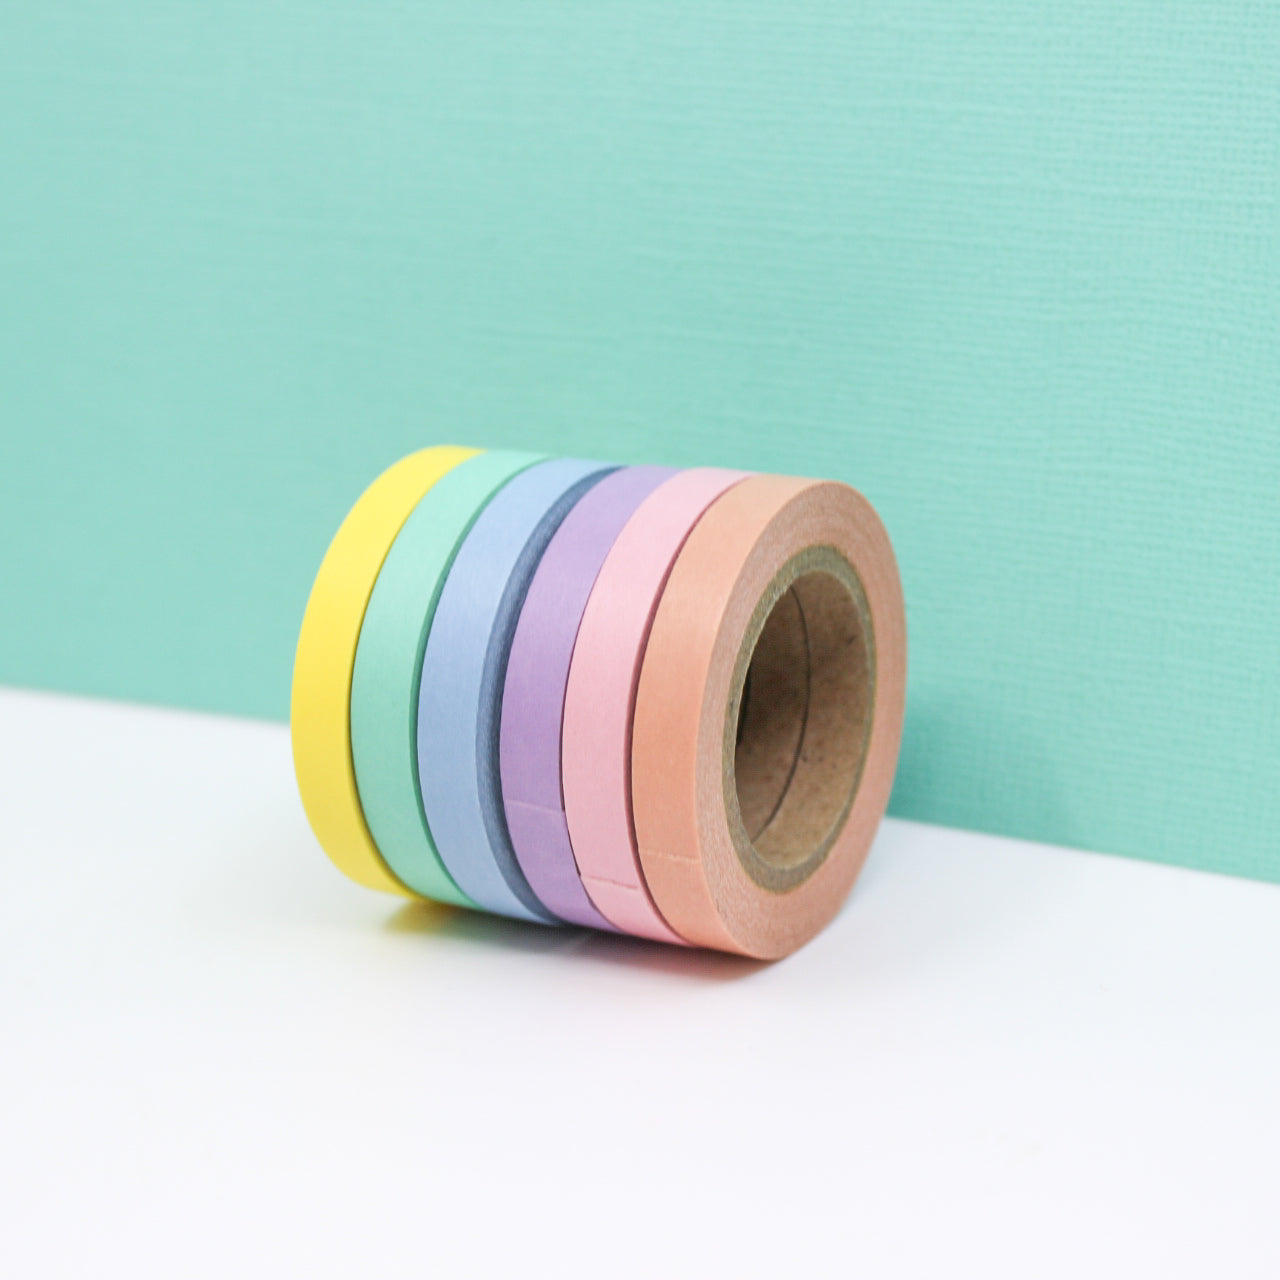 Pastel Solid Washi Tape Set - Crafts for Kids and Fun Home Activities